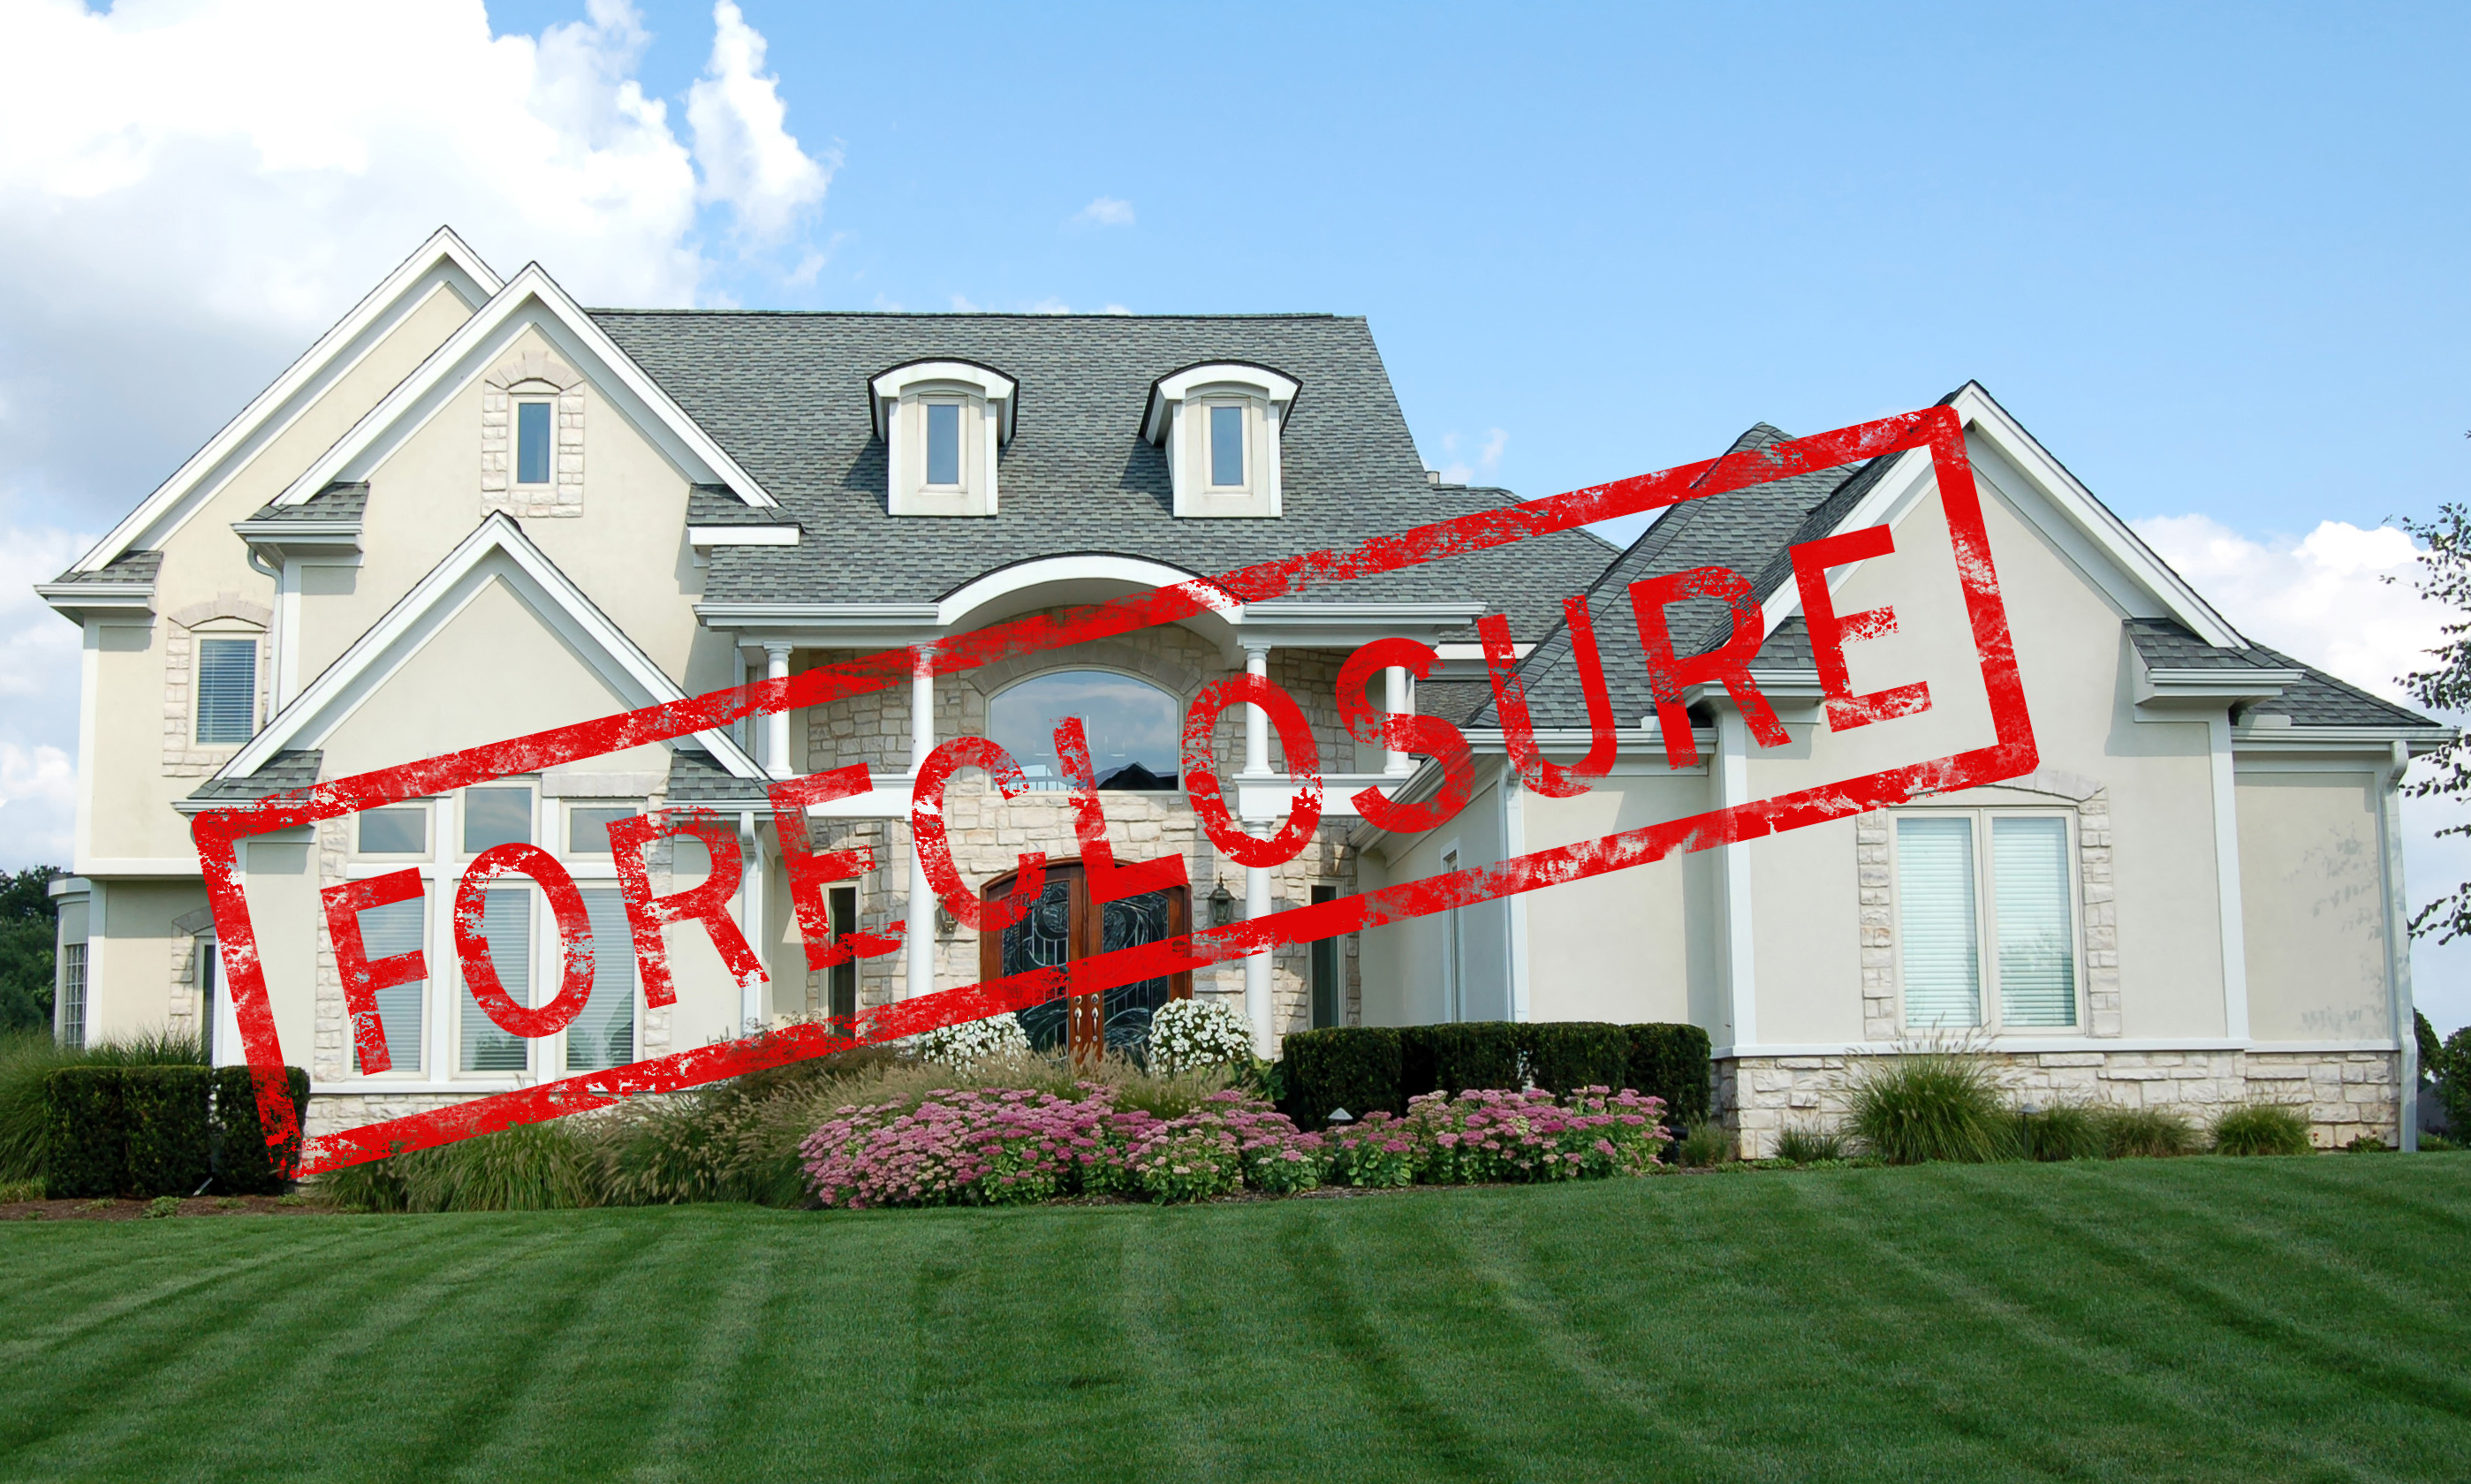 Call Michael Smith Appraisals, Inc when you need valuations pertaining to Floyd foreclosures